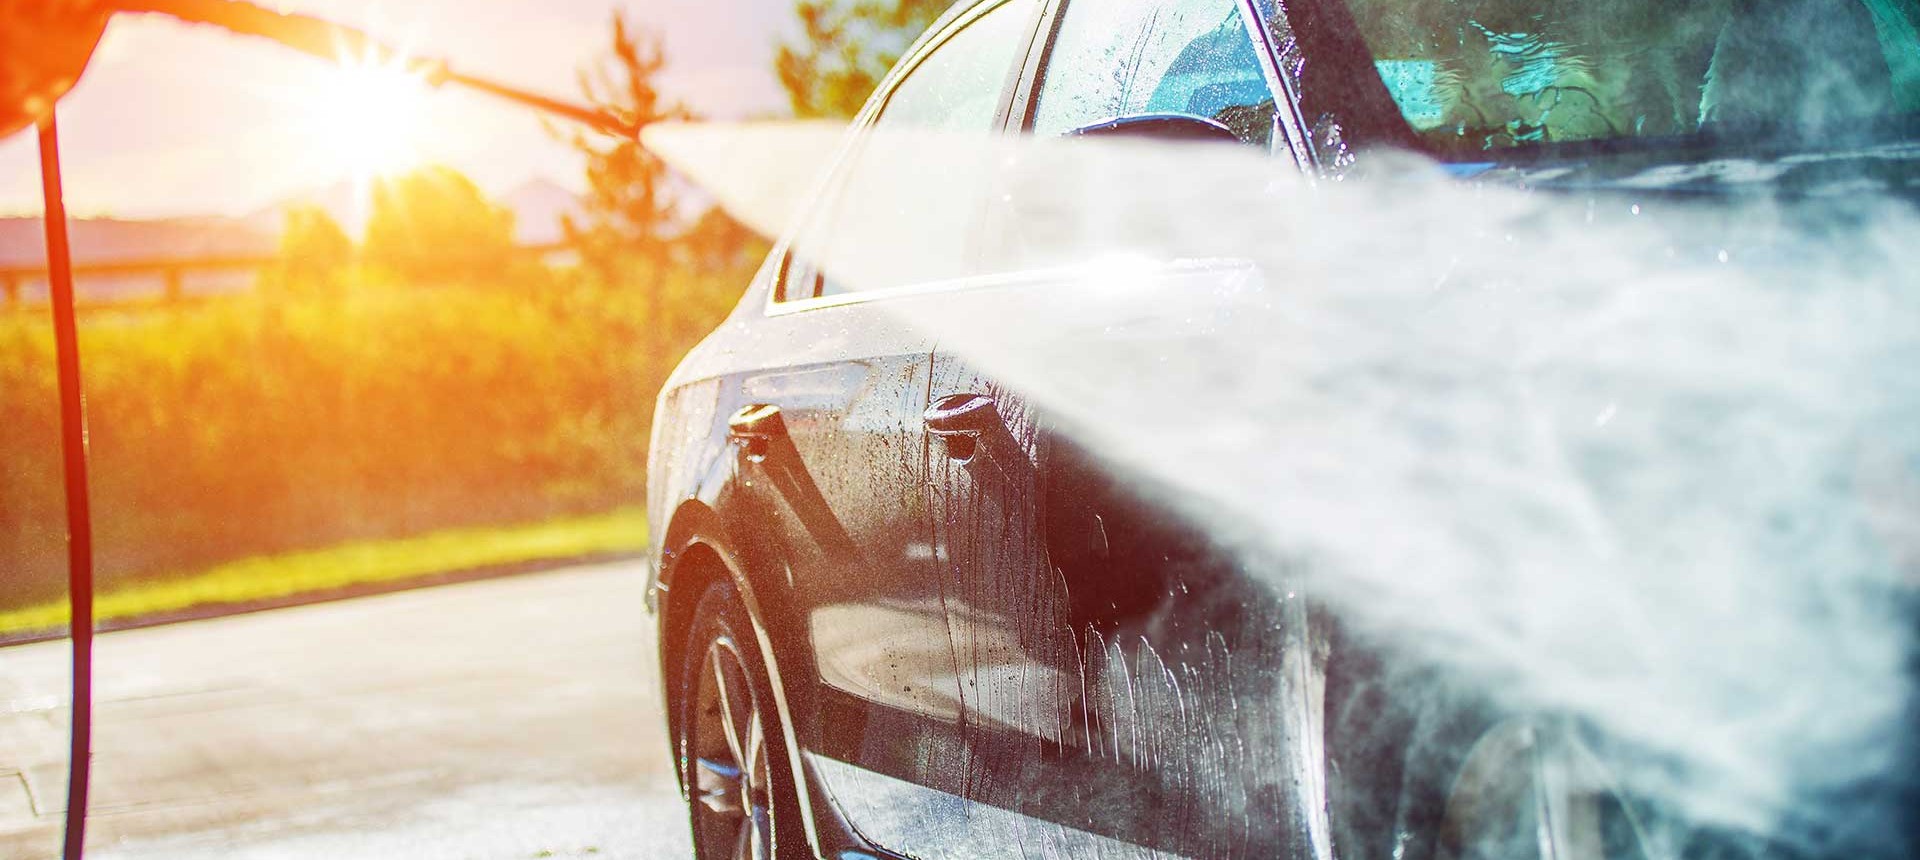 Winter Car Care - The UF Guide To Safer Cleaning